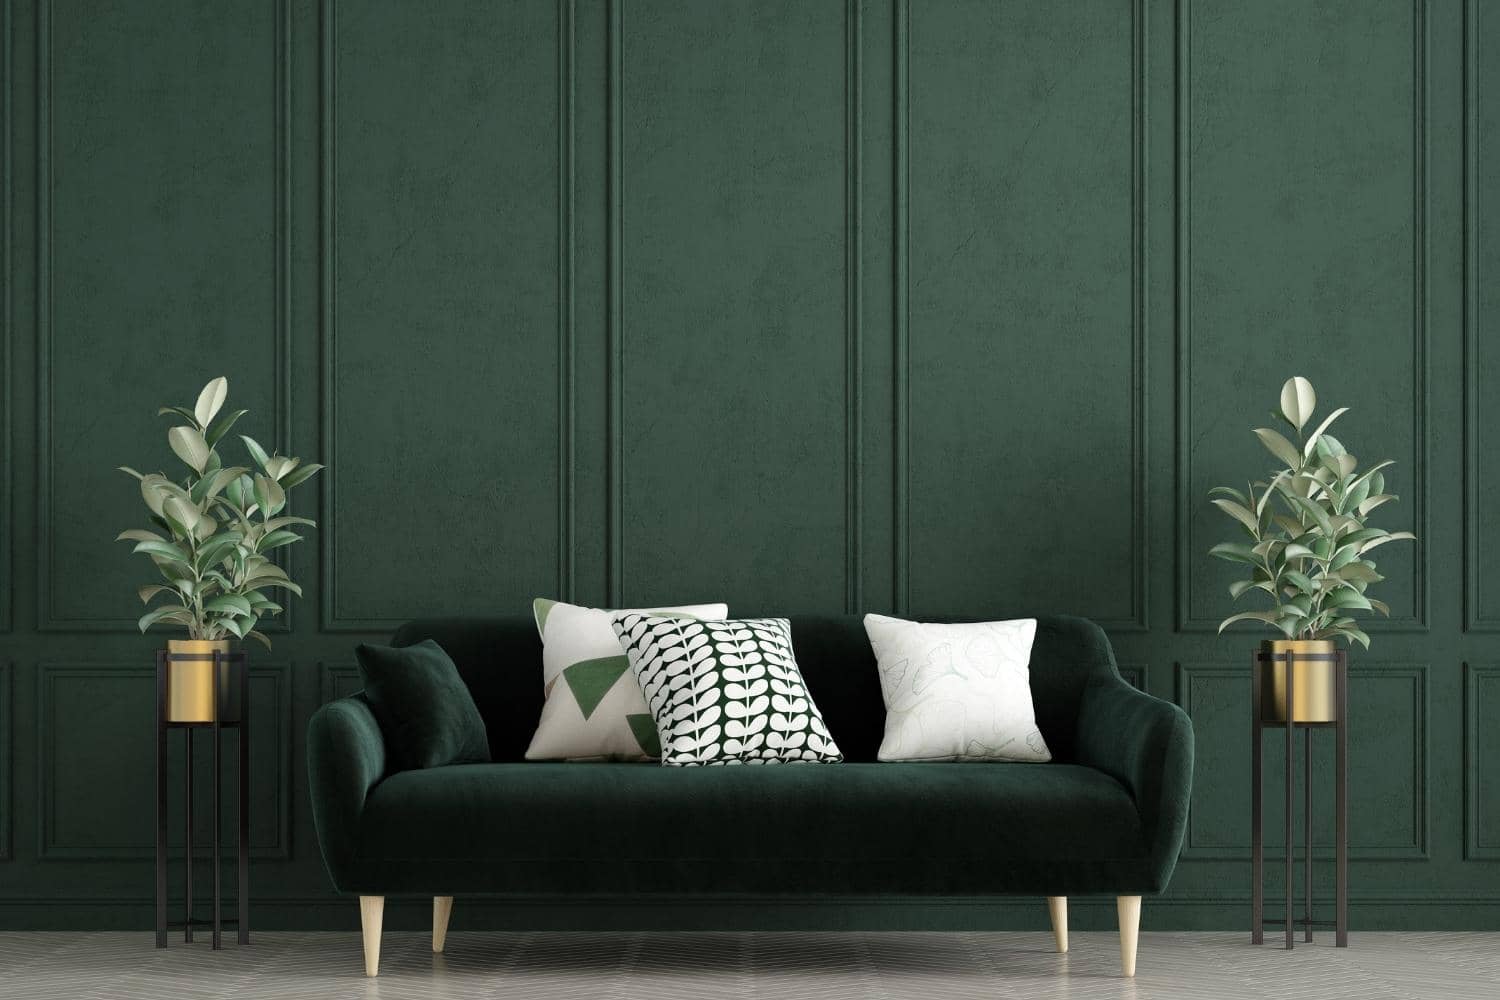 Green living room inspiration, visual interest in furniture, add contrast